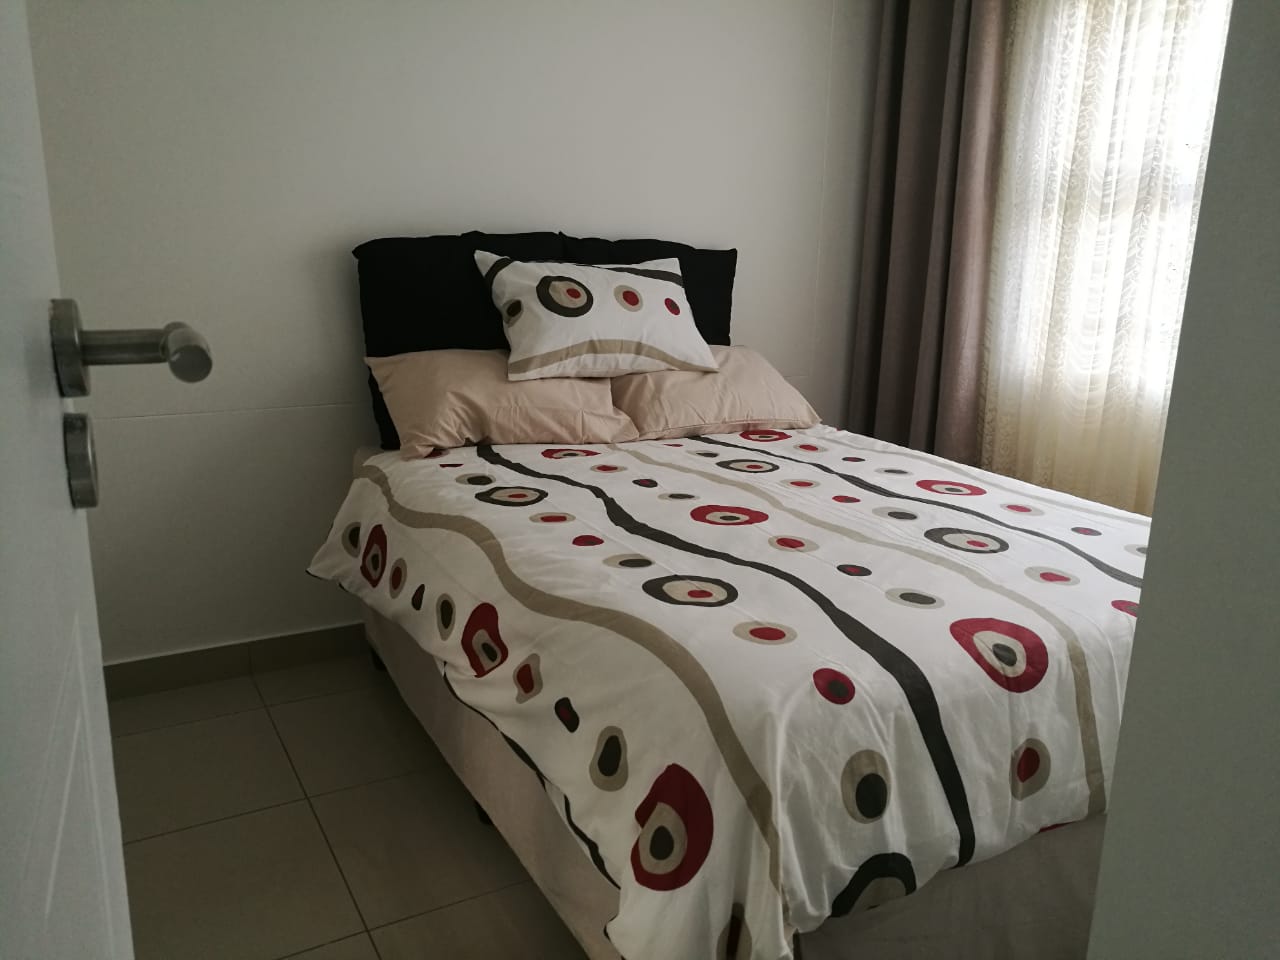  Accommodation available in Ballito